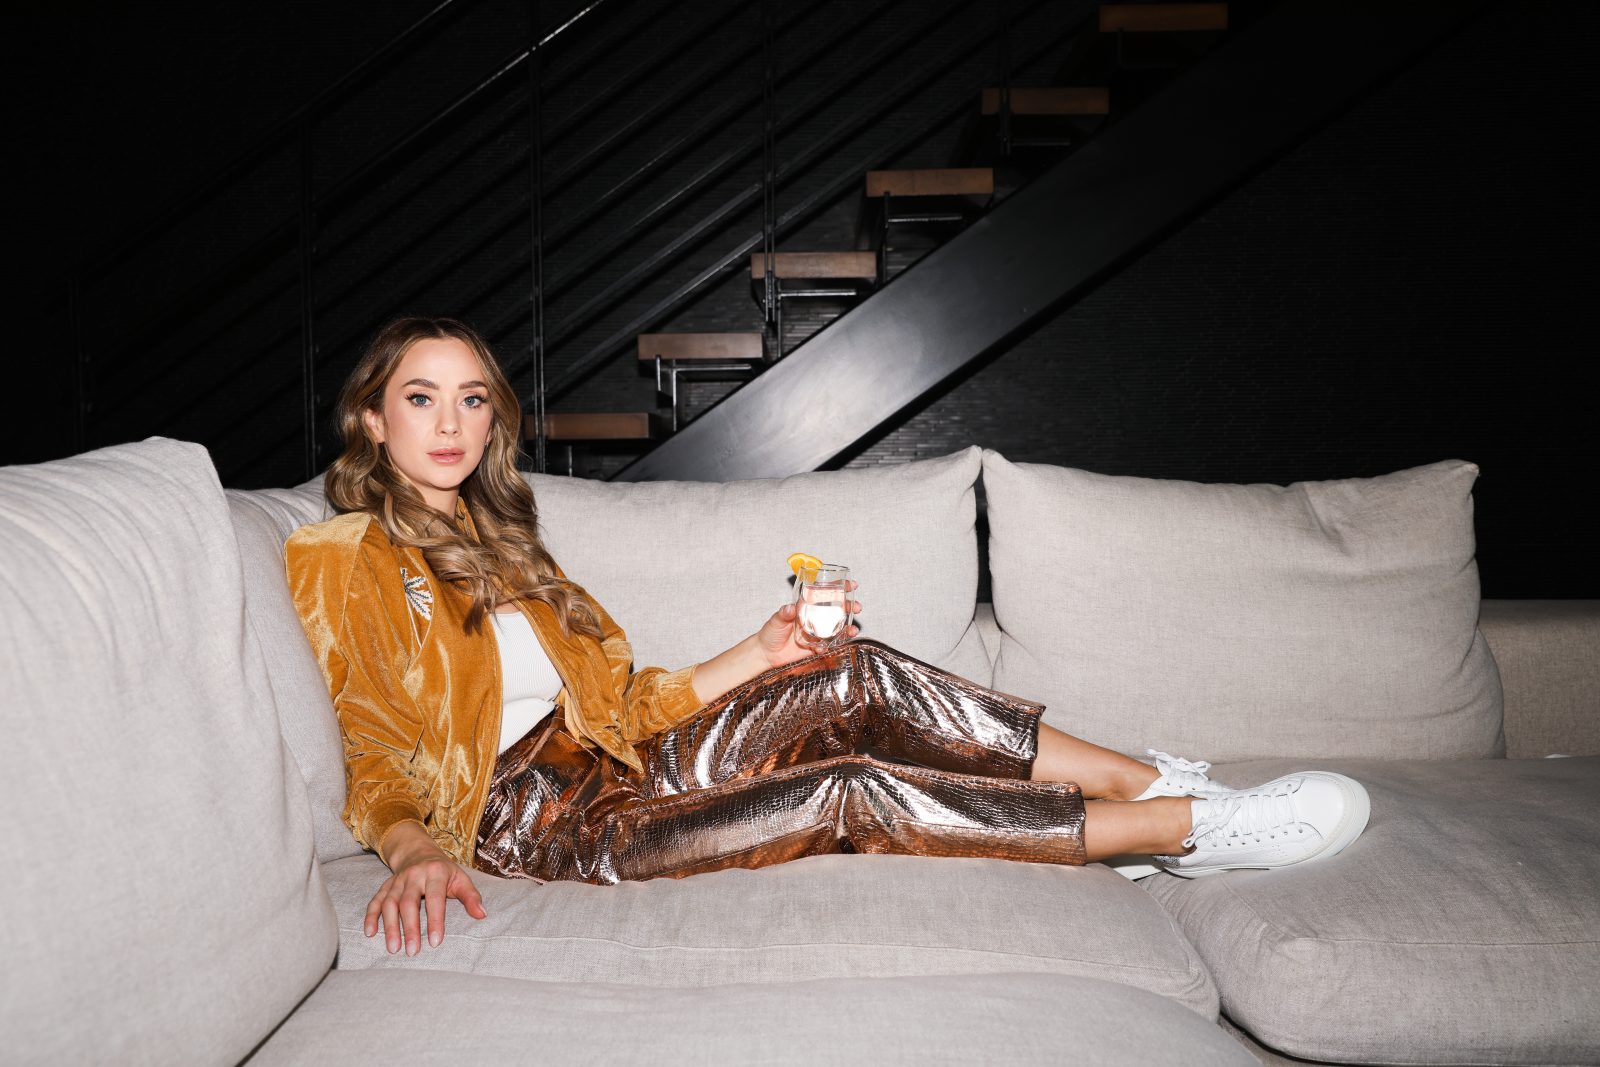 Celine on a couch with velvet yellow jacket